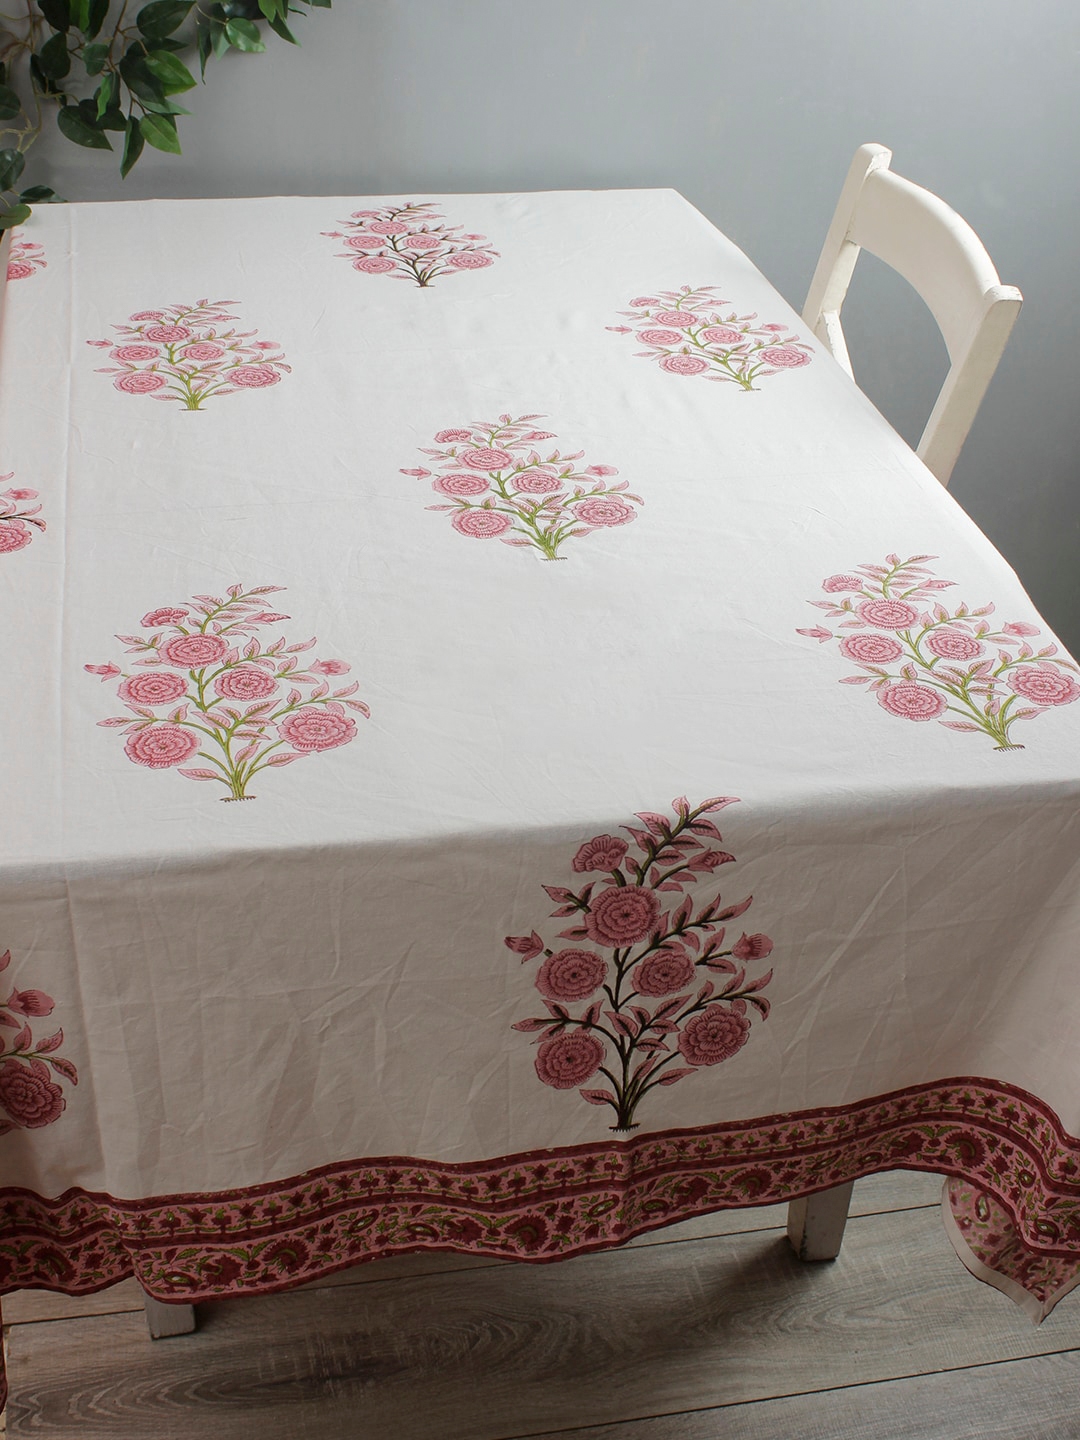 Rajasthan Decor White   Pink Floral Printed 6 Seater Table Cover